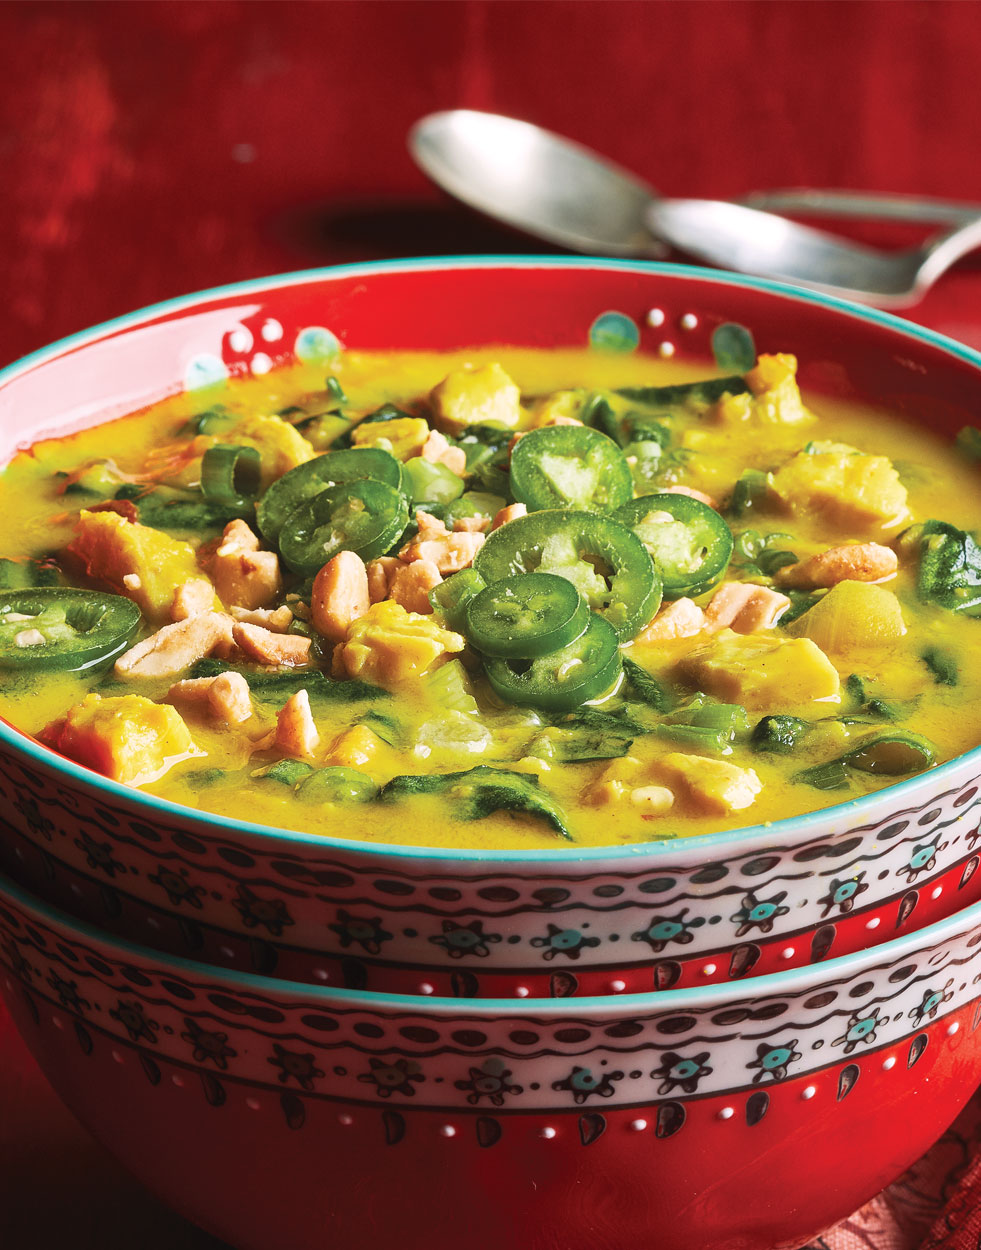 Red Lentil & Chicken Soup with spinach Recipe